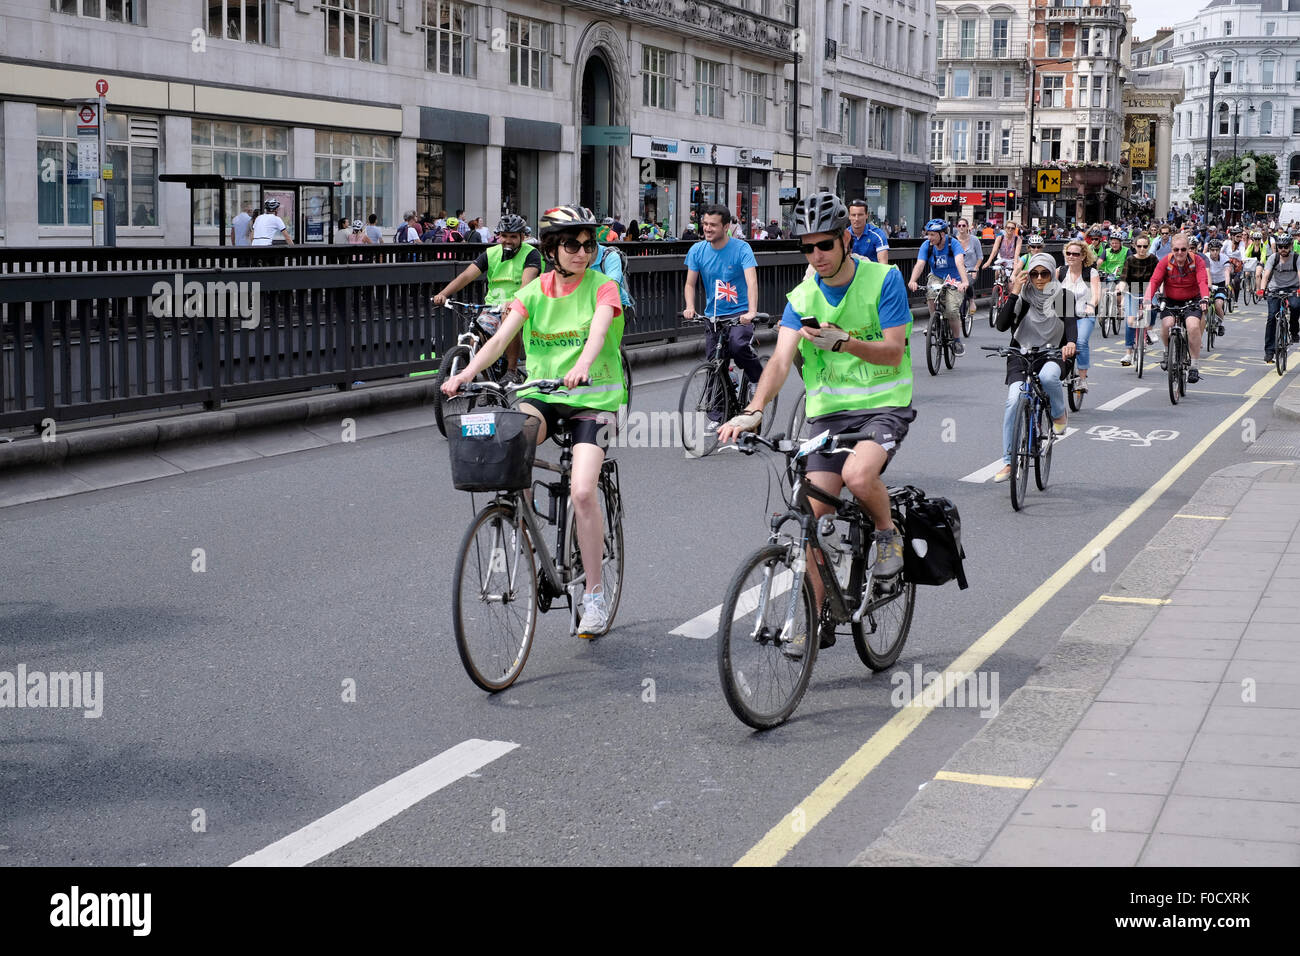 Cyclists in central London during the ride London cycling festival Stock Photo